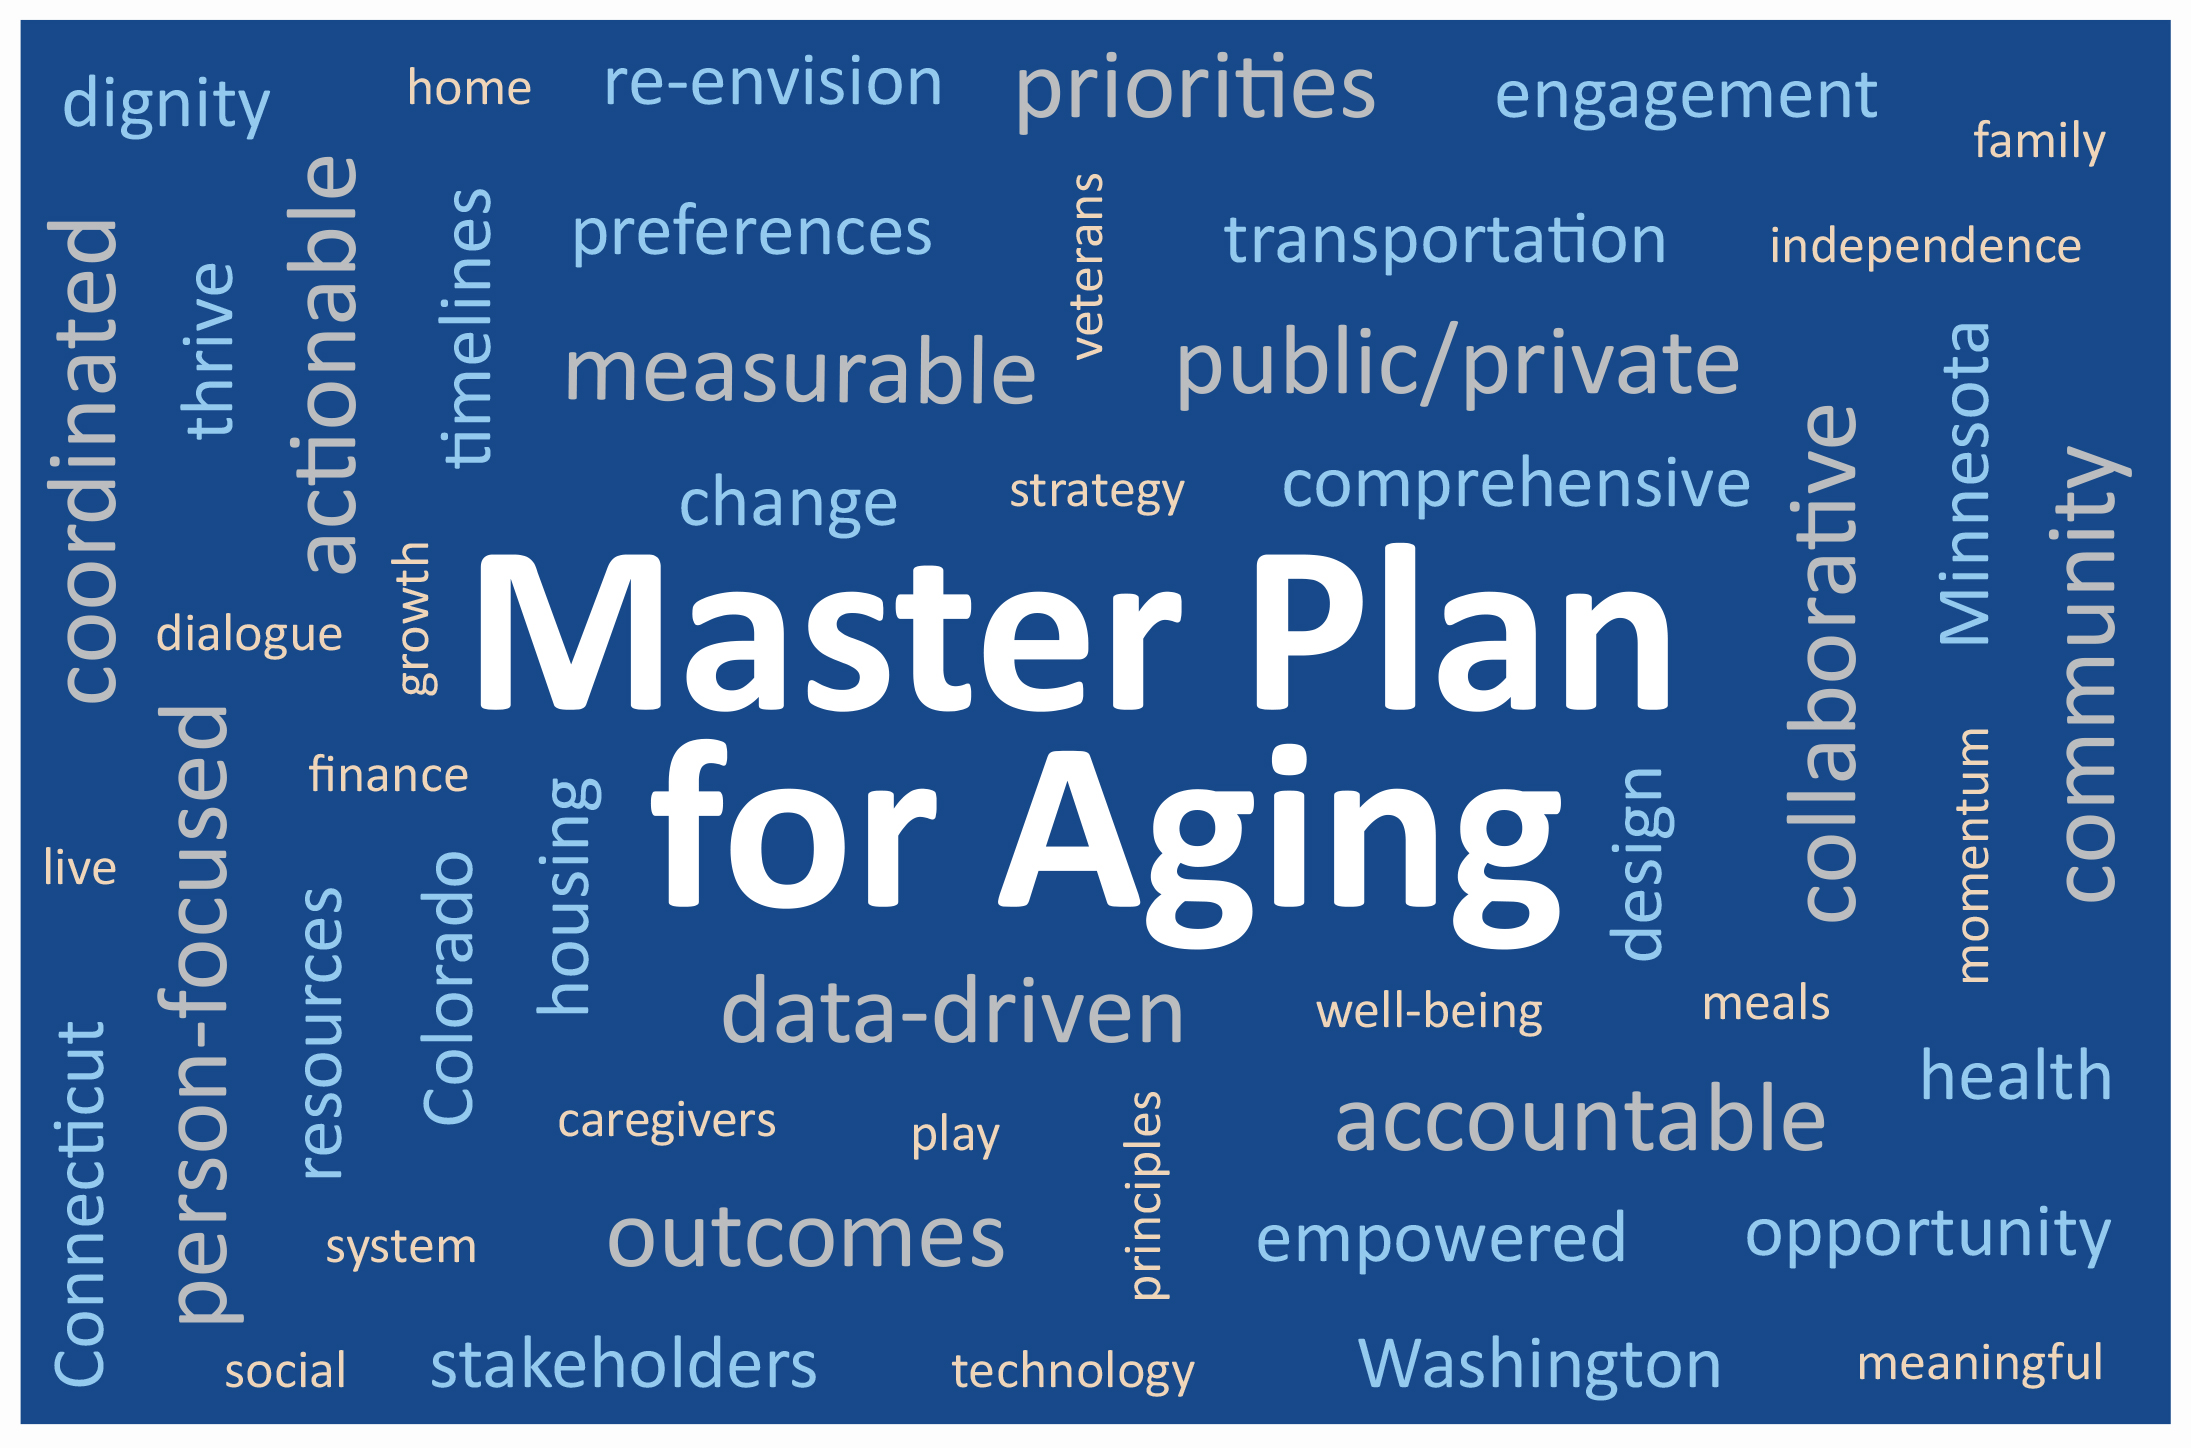 Word cloud related to the Master Plan for Aging. 